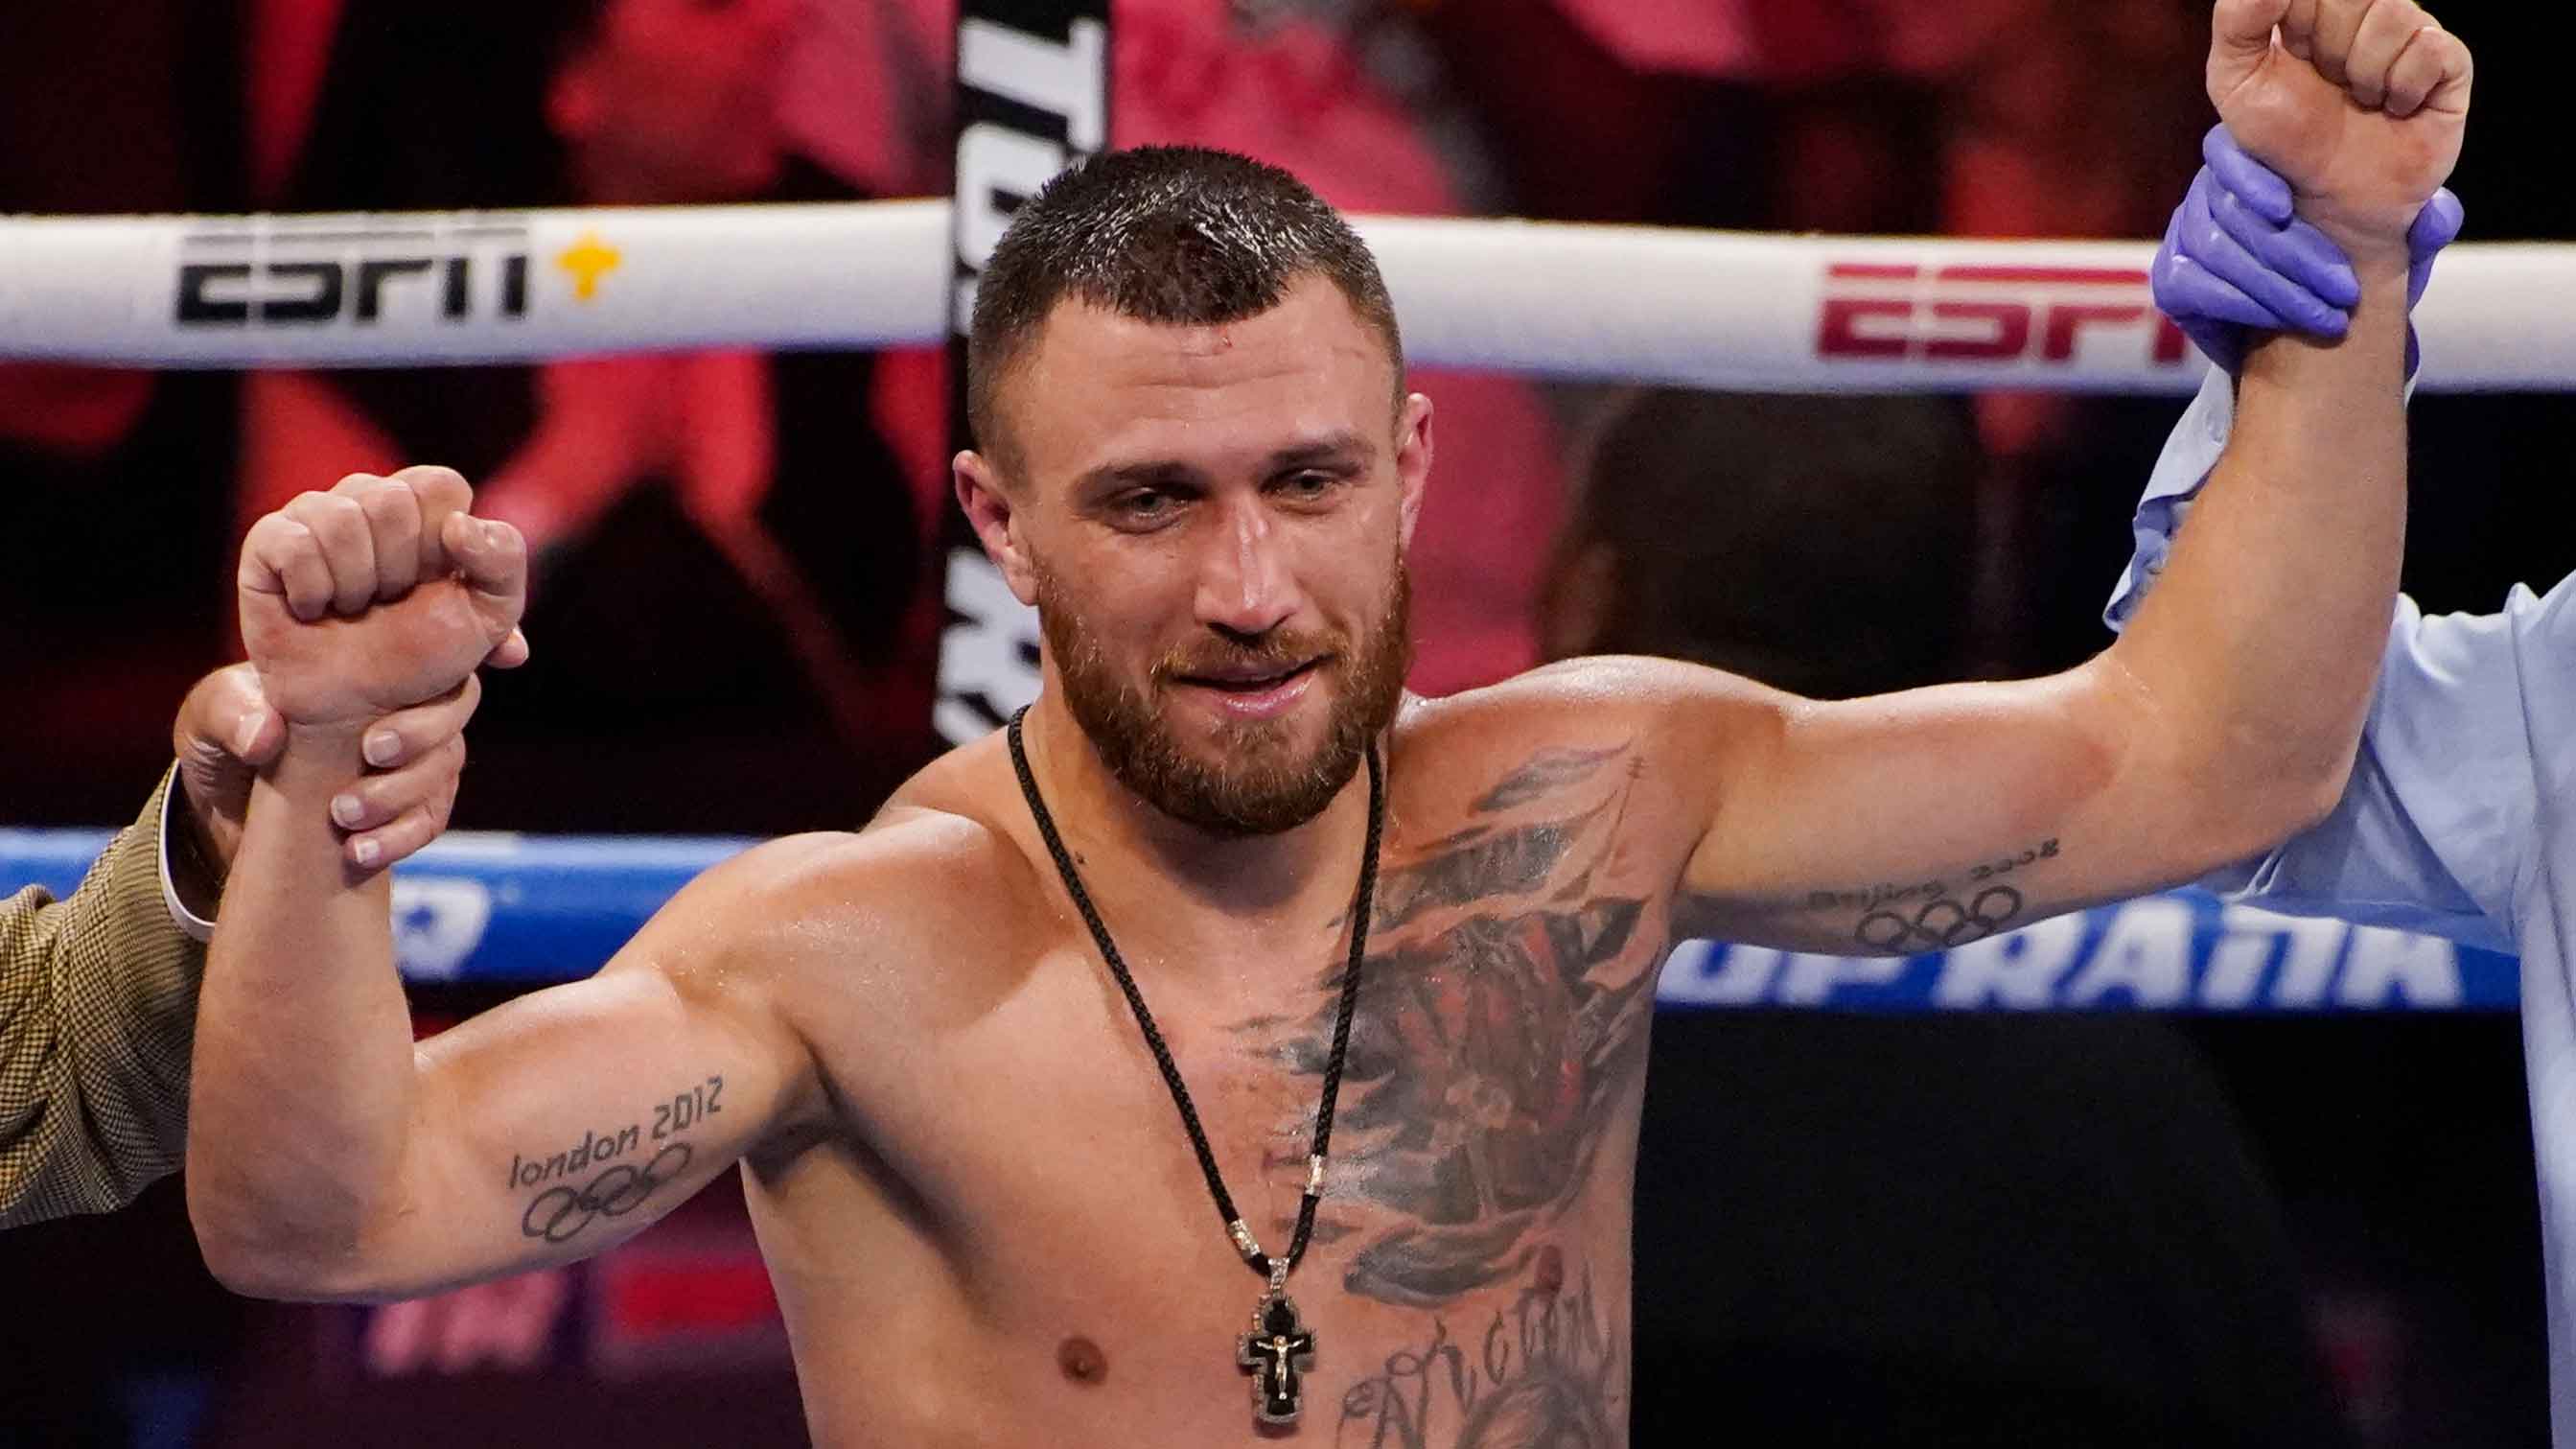 After Fighting for Ukraine, Vasiliy Lomachenko Fights Again in Ring